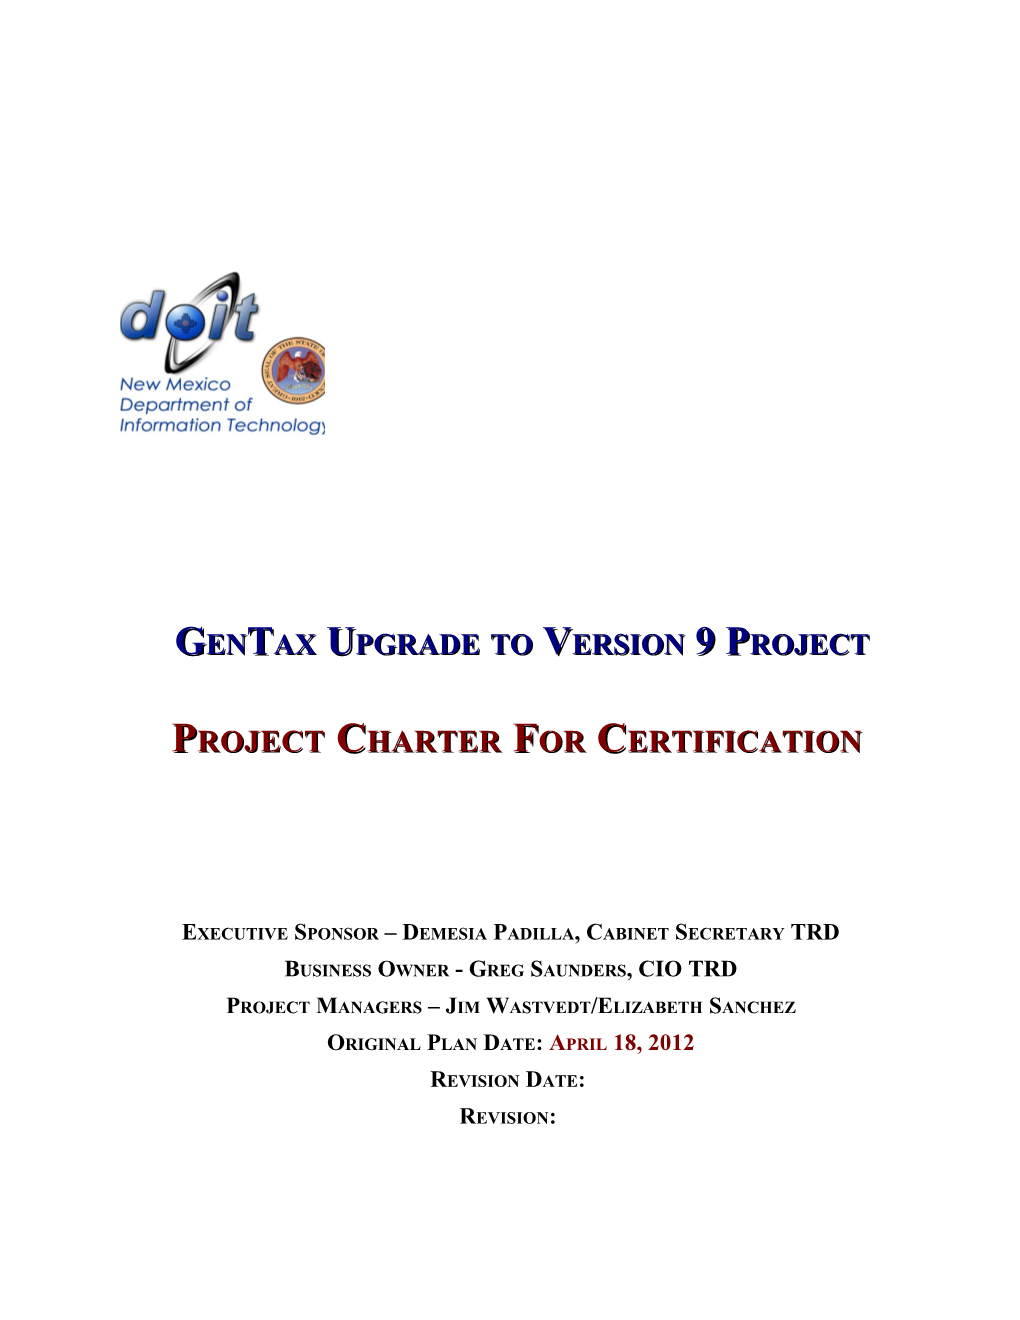 Gentax Upgrade to Version 9 Project